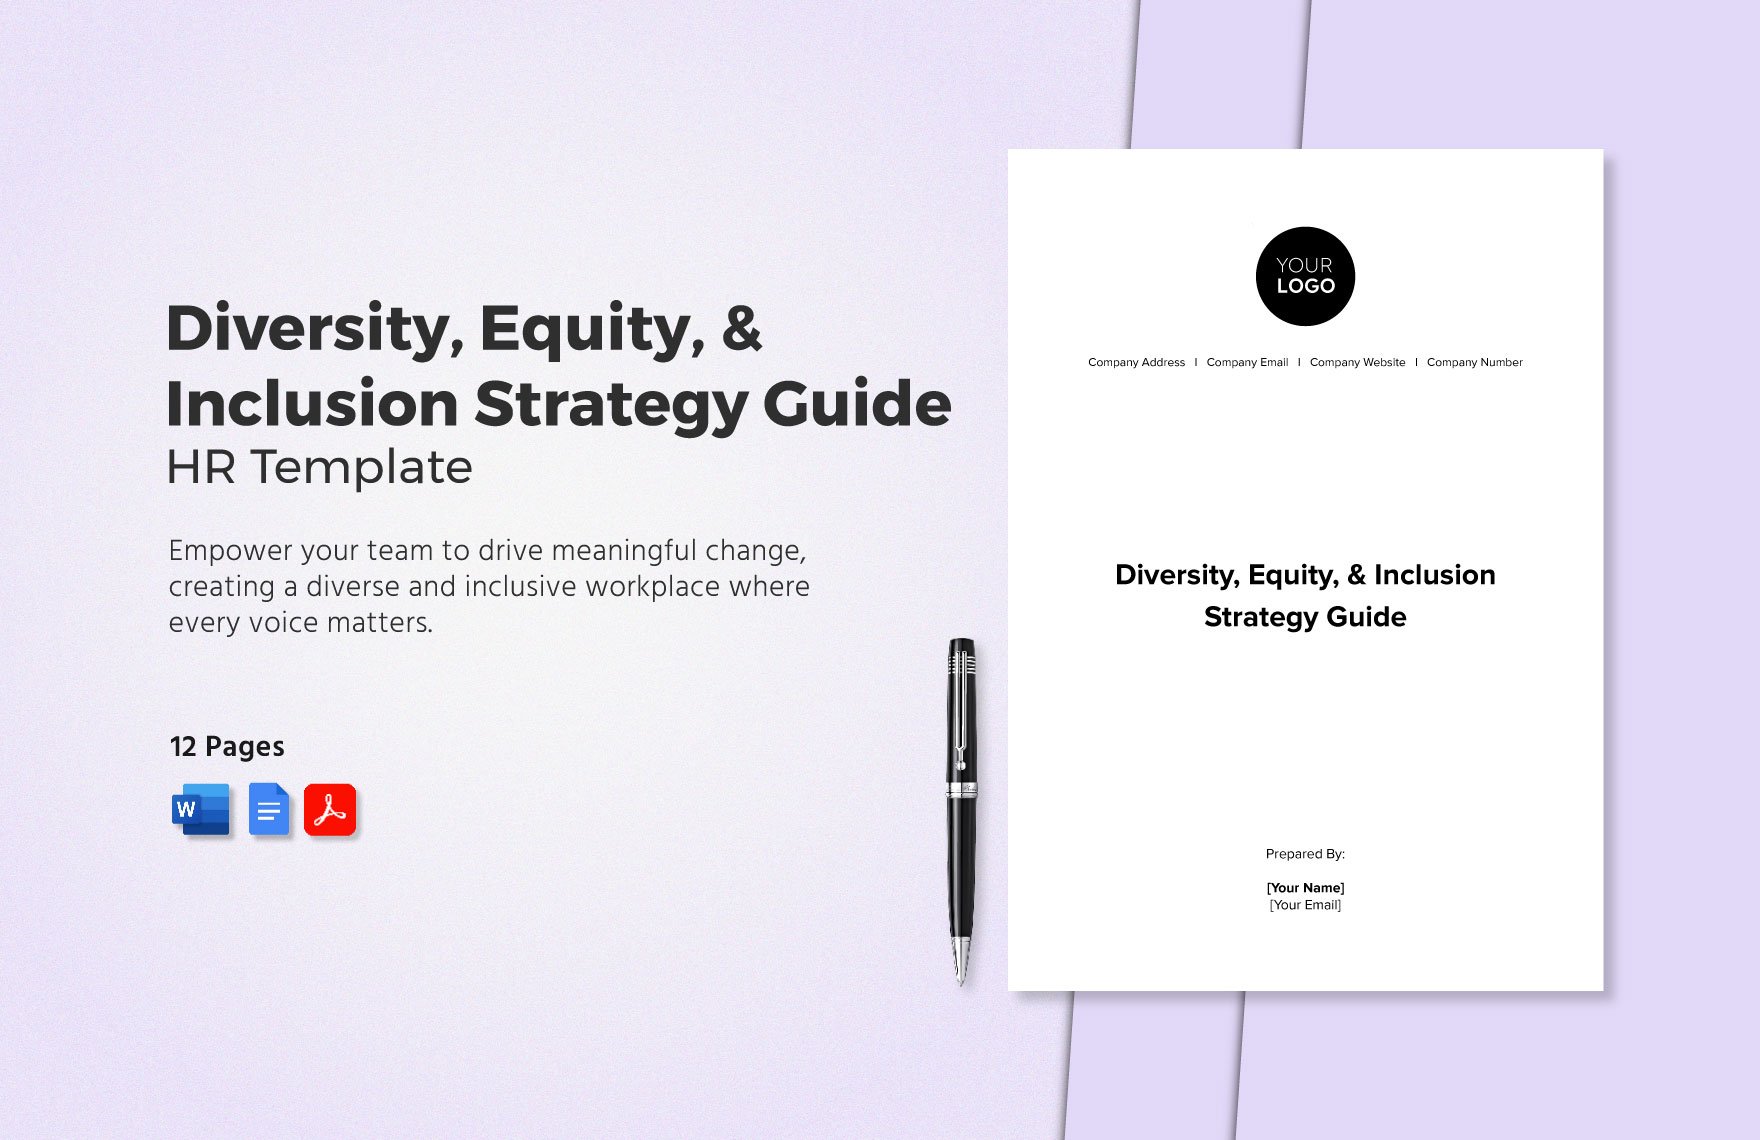 Diversity, Equity, & Inclusion Strategy Guide HR Template